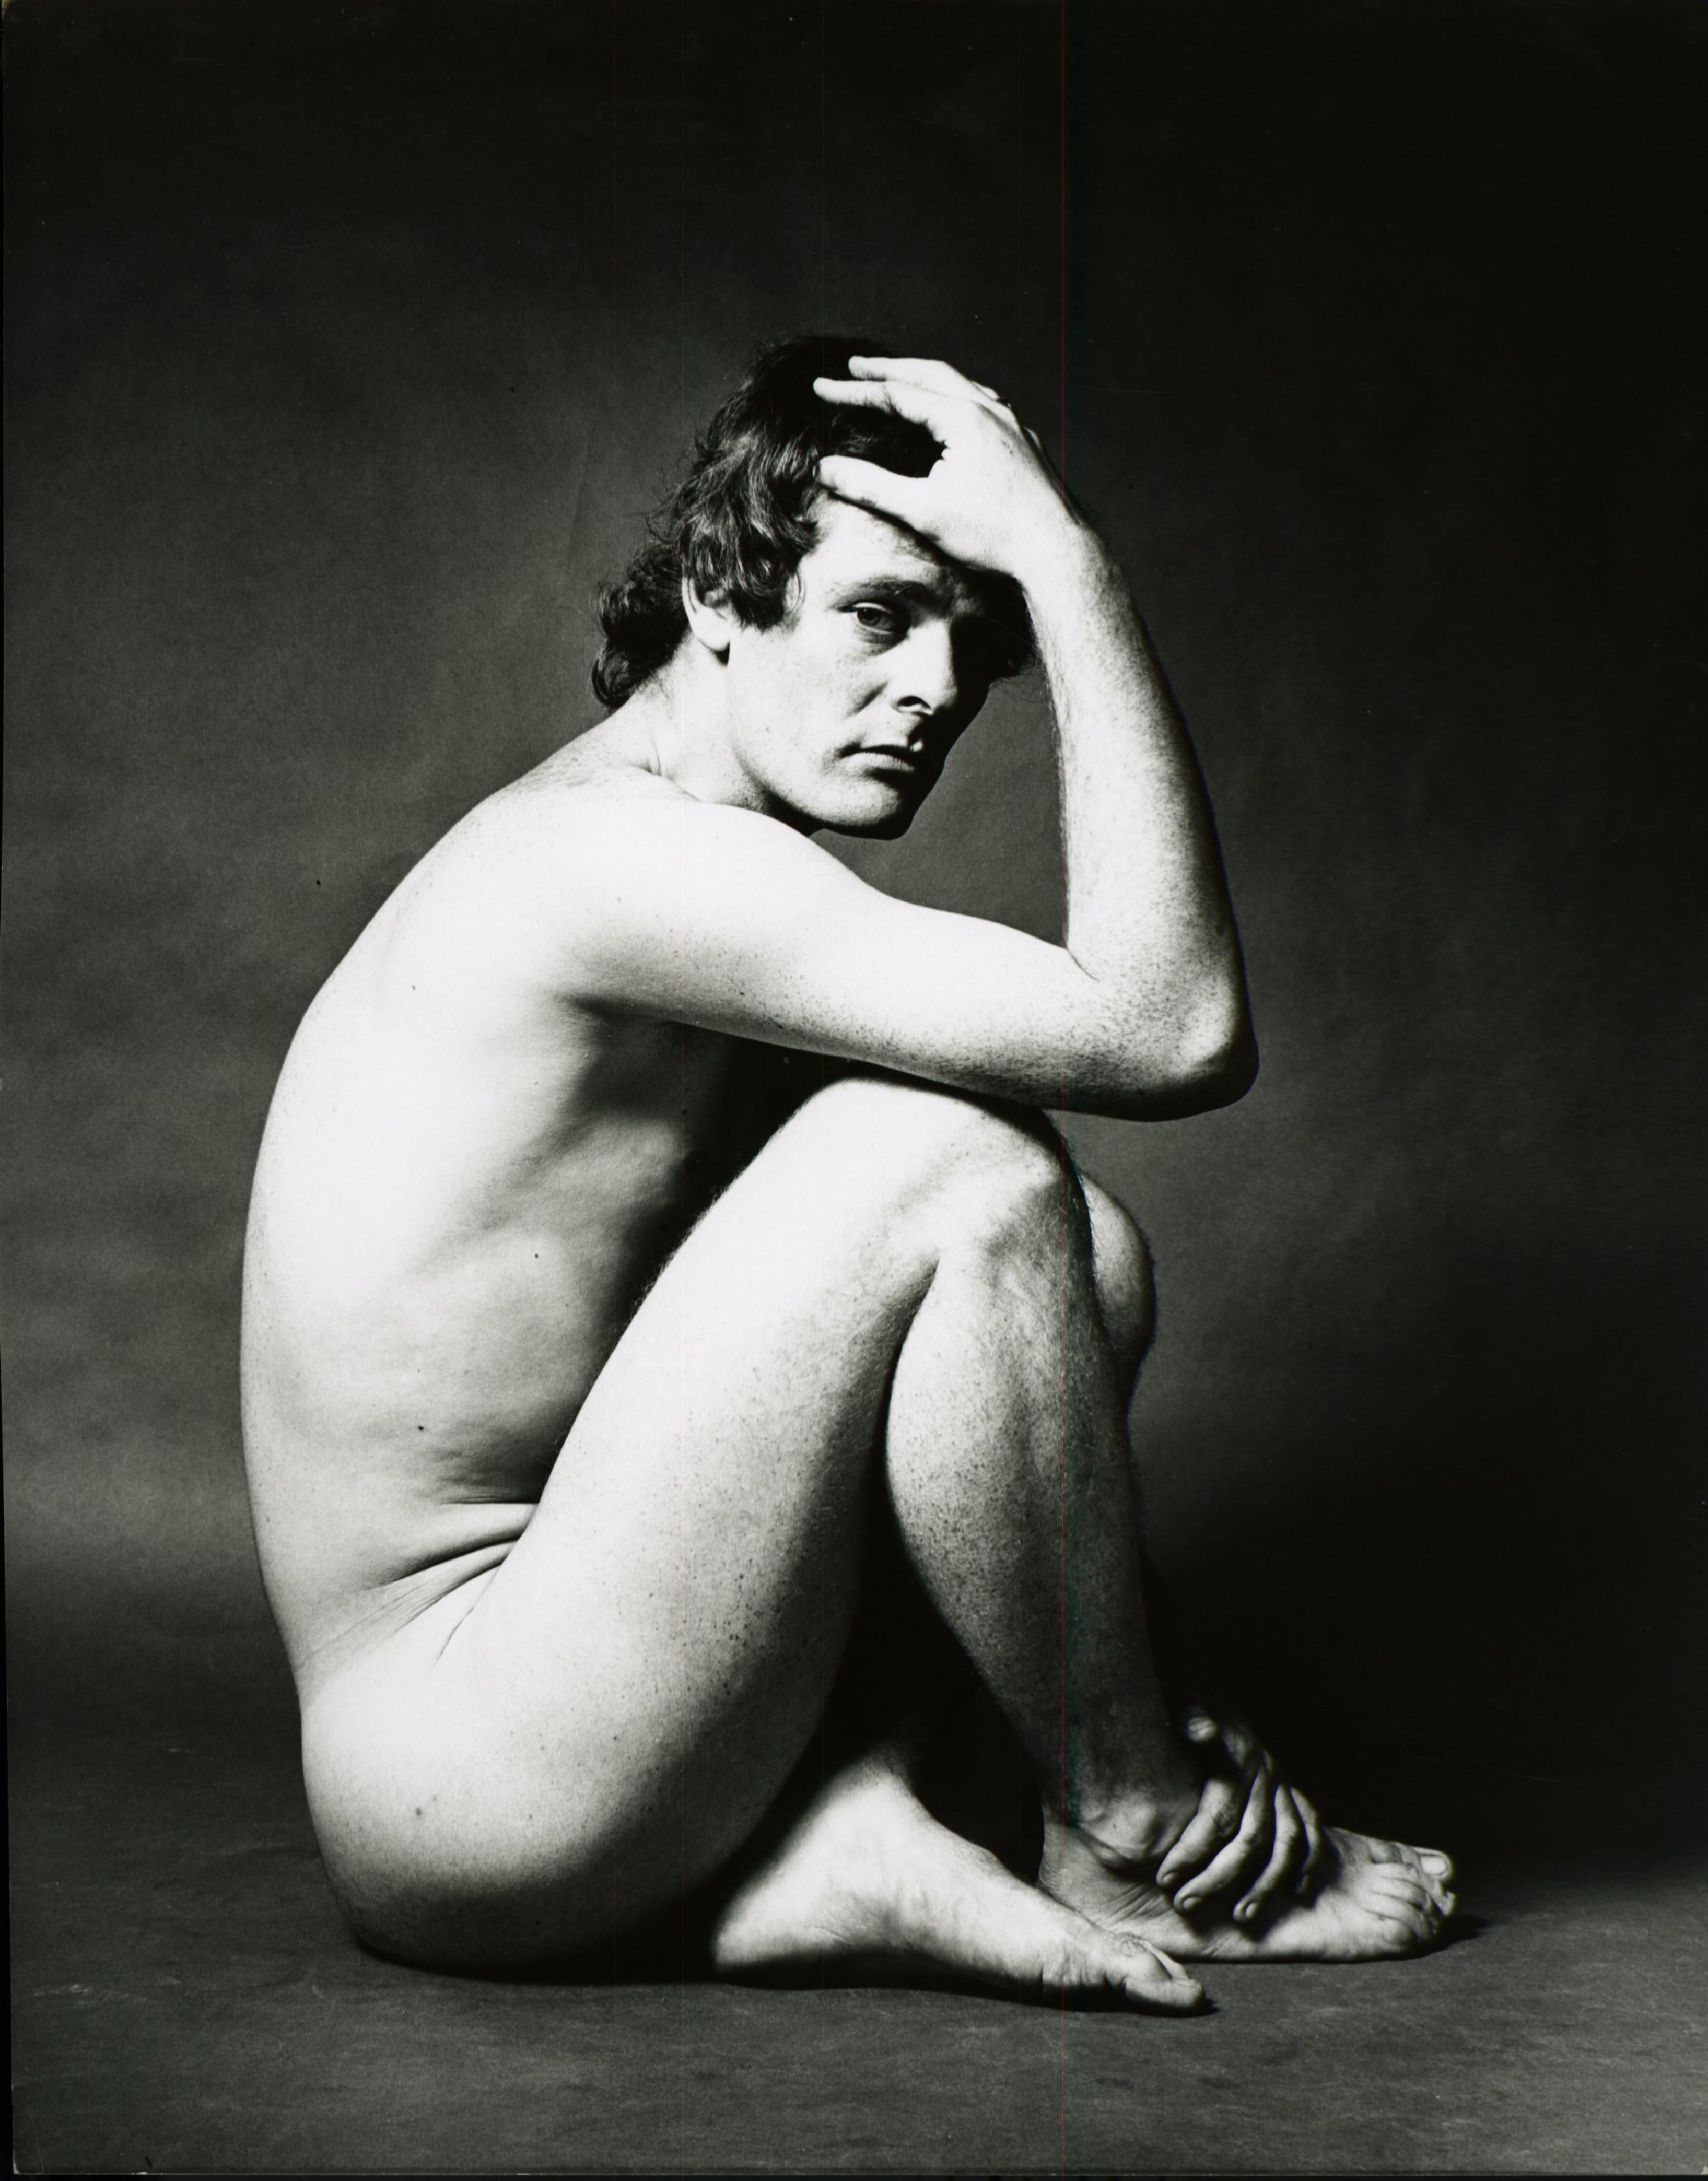 Warhol films director Paul Morrissey photographed nude for Vogue magazine